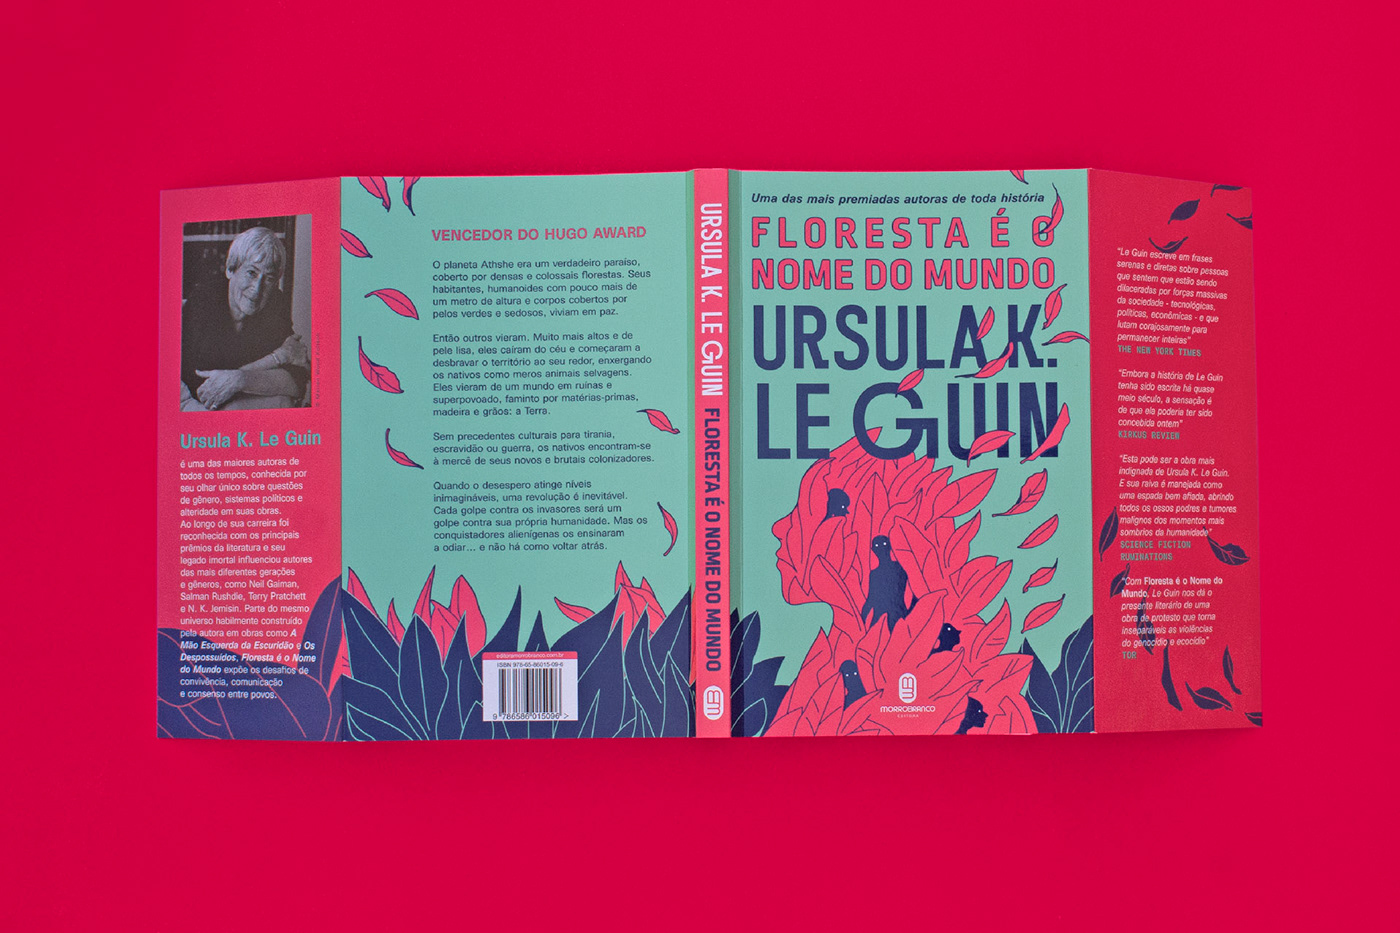 bookcover colonialism science fiction Scifi ursula k. le guin anti colonial anti war environment feminism forest